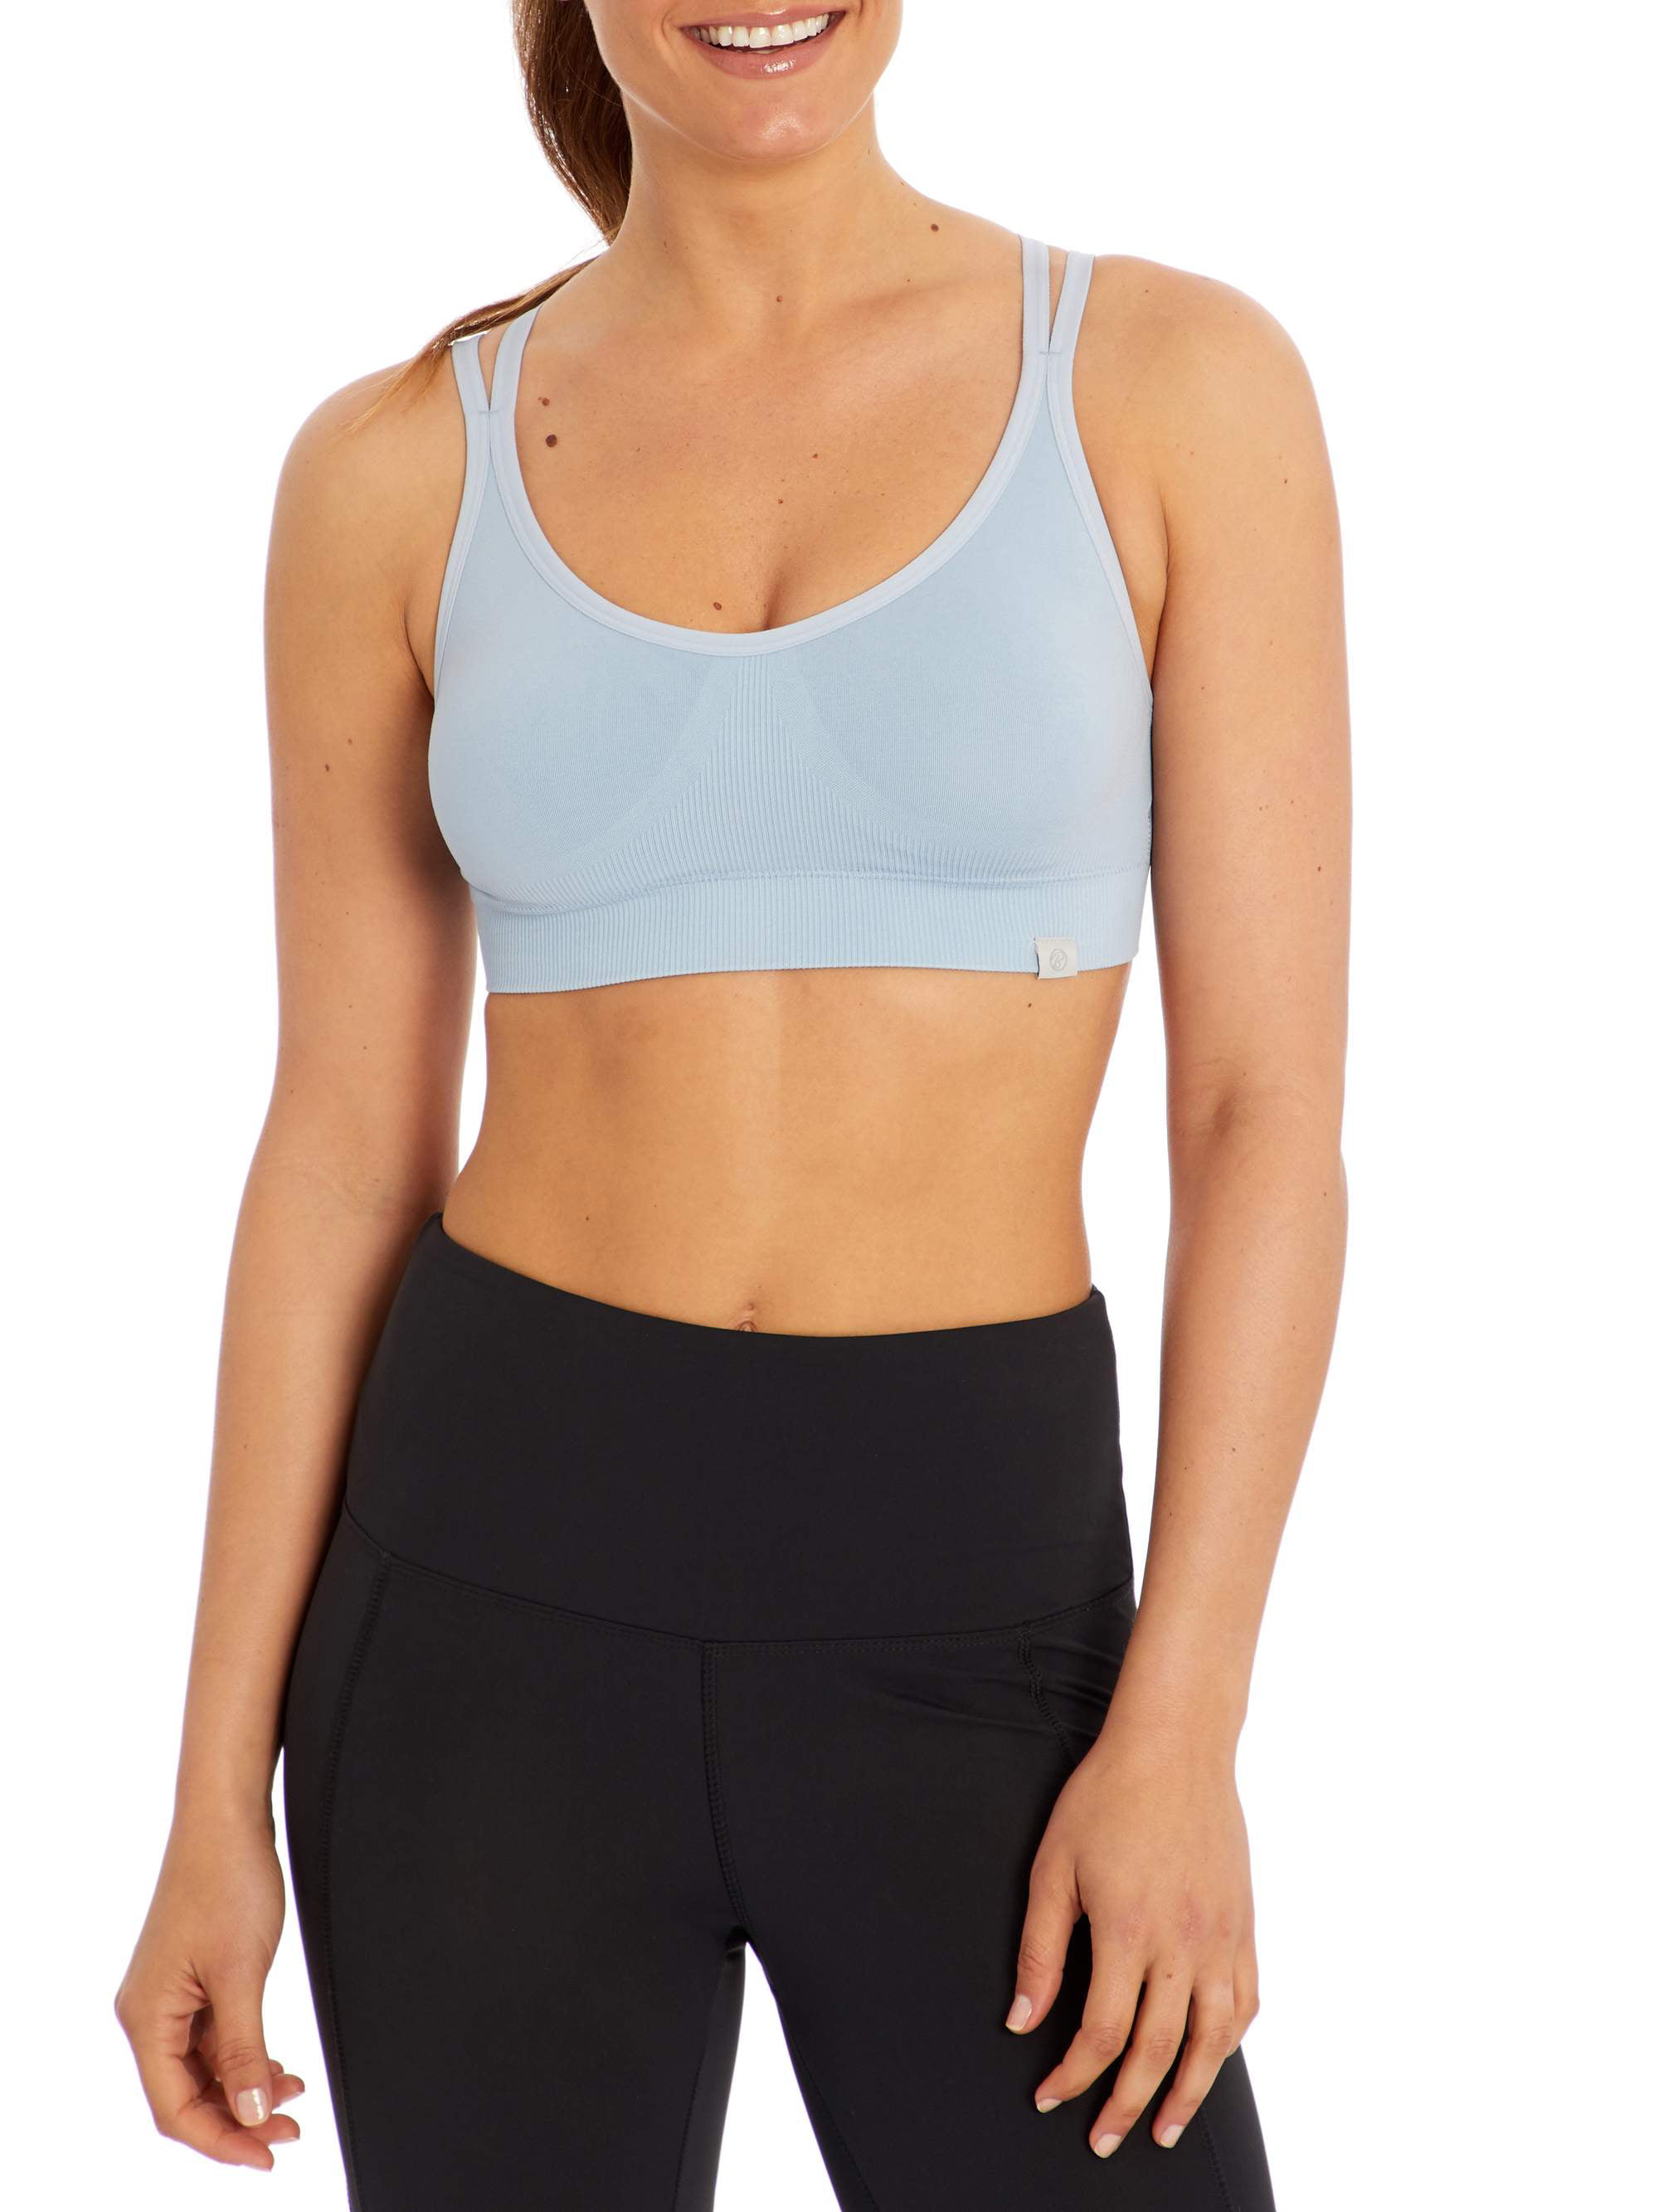  BALLY TOTAL FITNESS Kristen Low Impact Sports Bra, Black,  X-Large : Clothing, Shoes & Jewelry